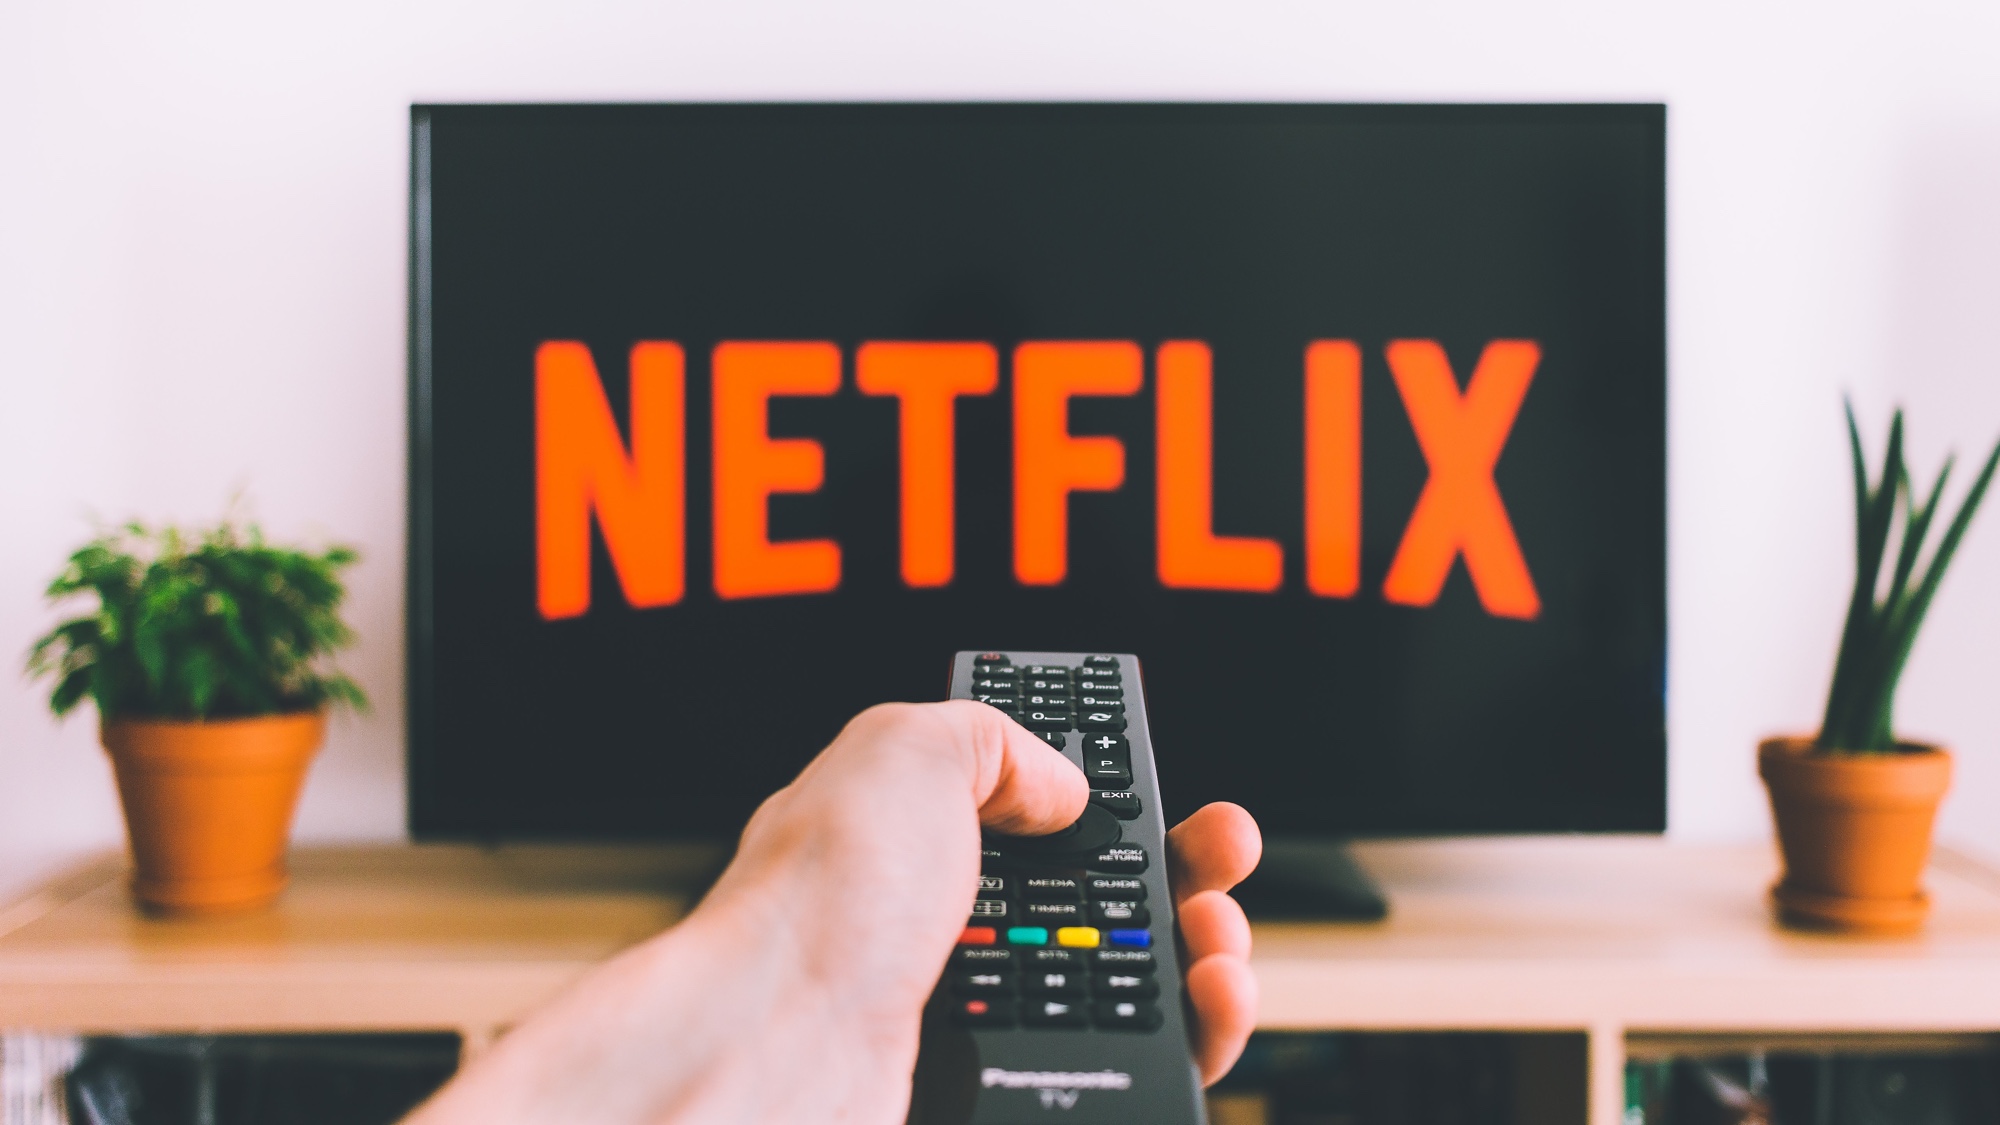 A television with the Netflix logo sits behind a hand holding a remote